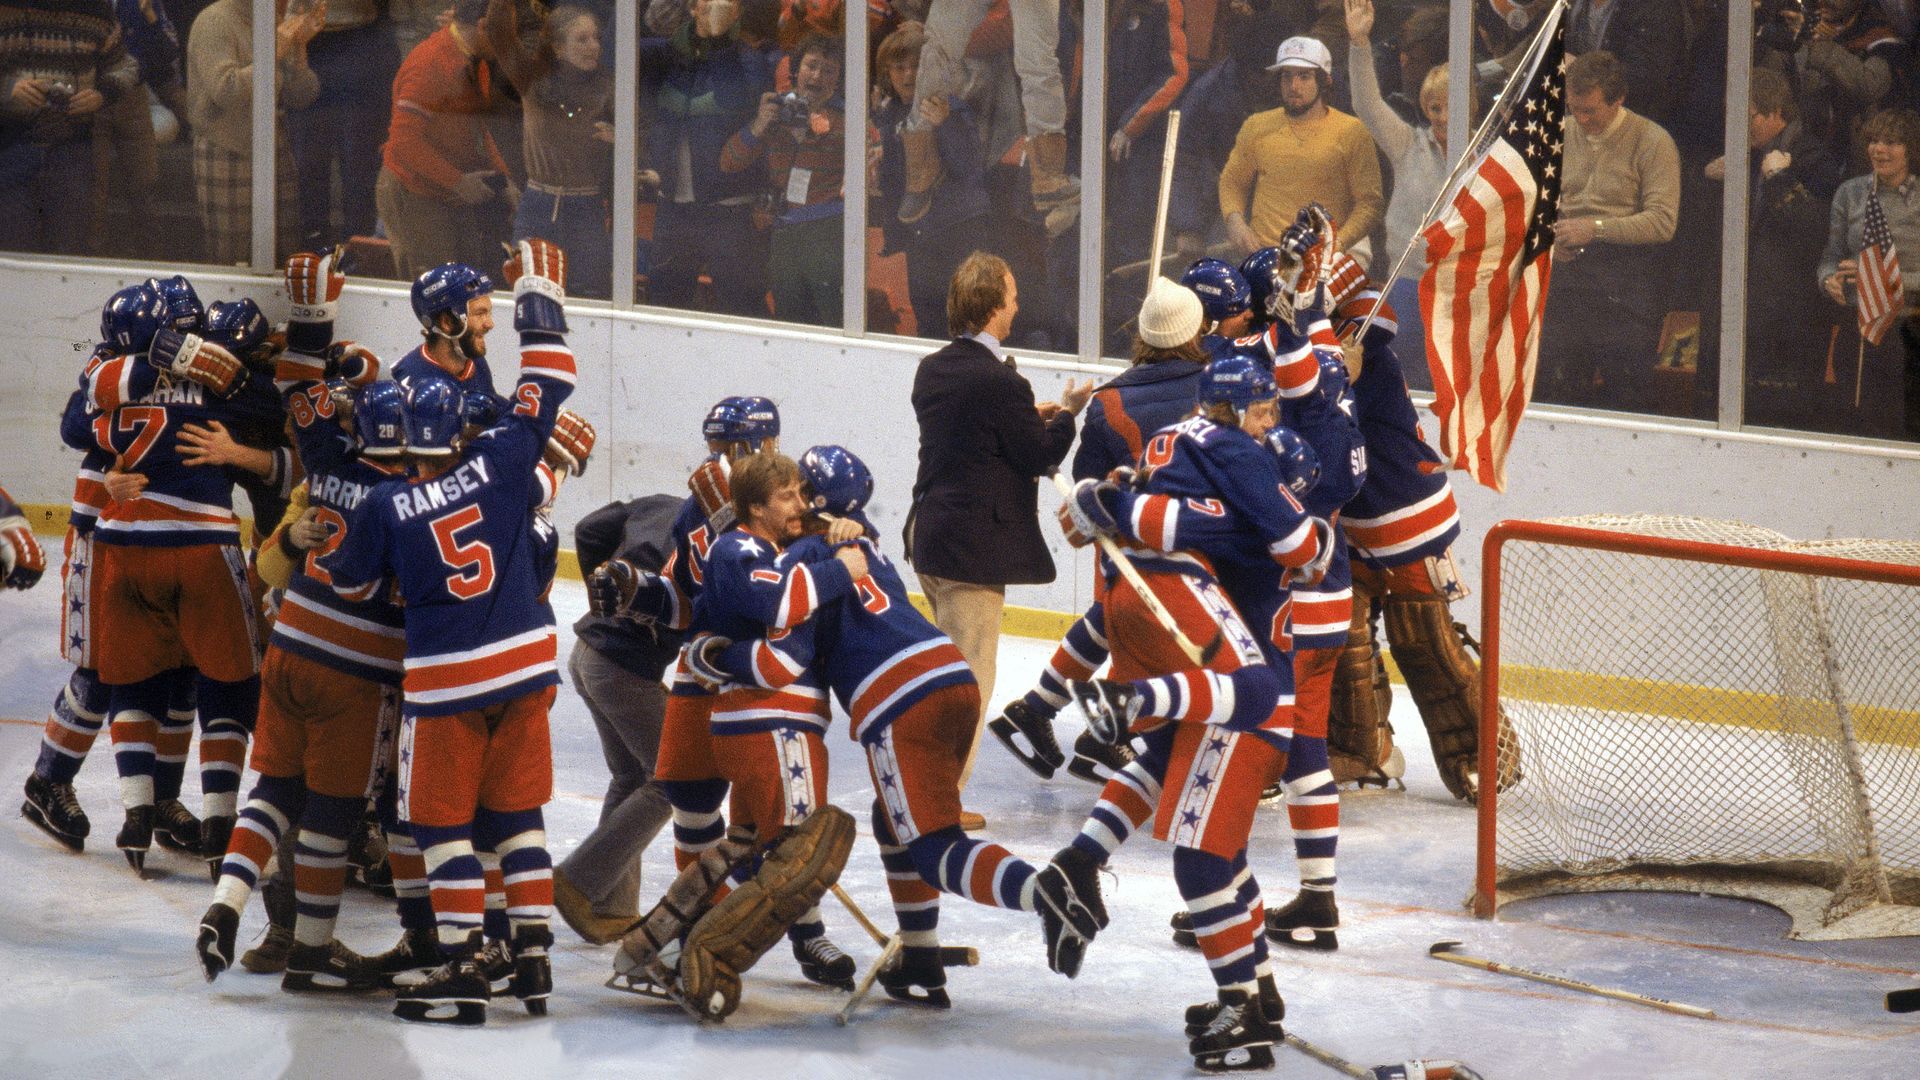 The 1980 'Miracle on Ice' U.S. Team: 5 Interesting Facts